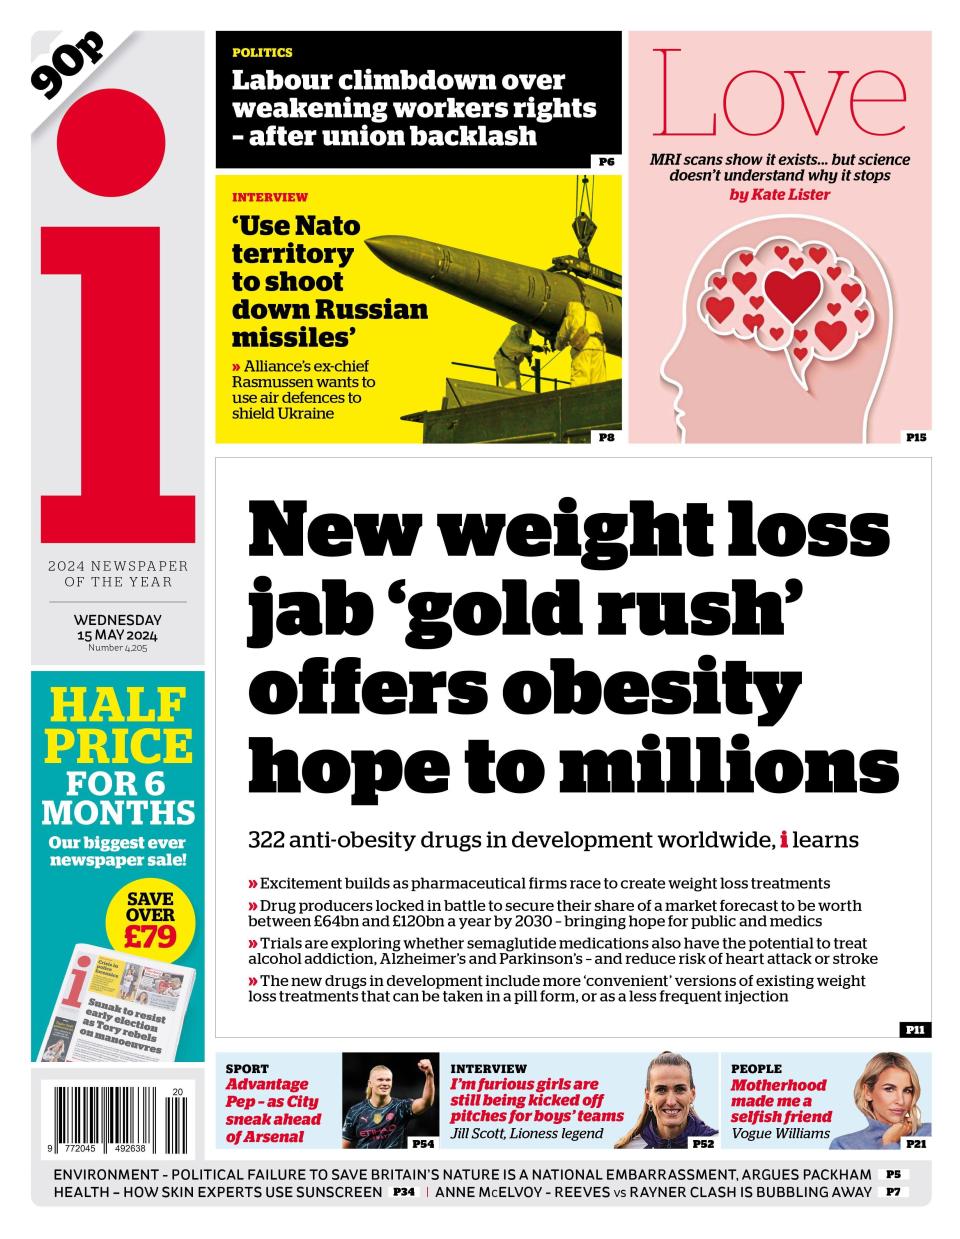 i news: Weight loss jab 'could reduce heart attack risk' as it is described as a gold rush